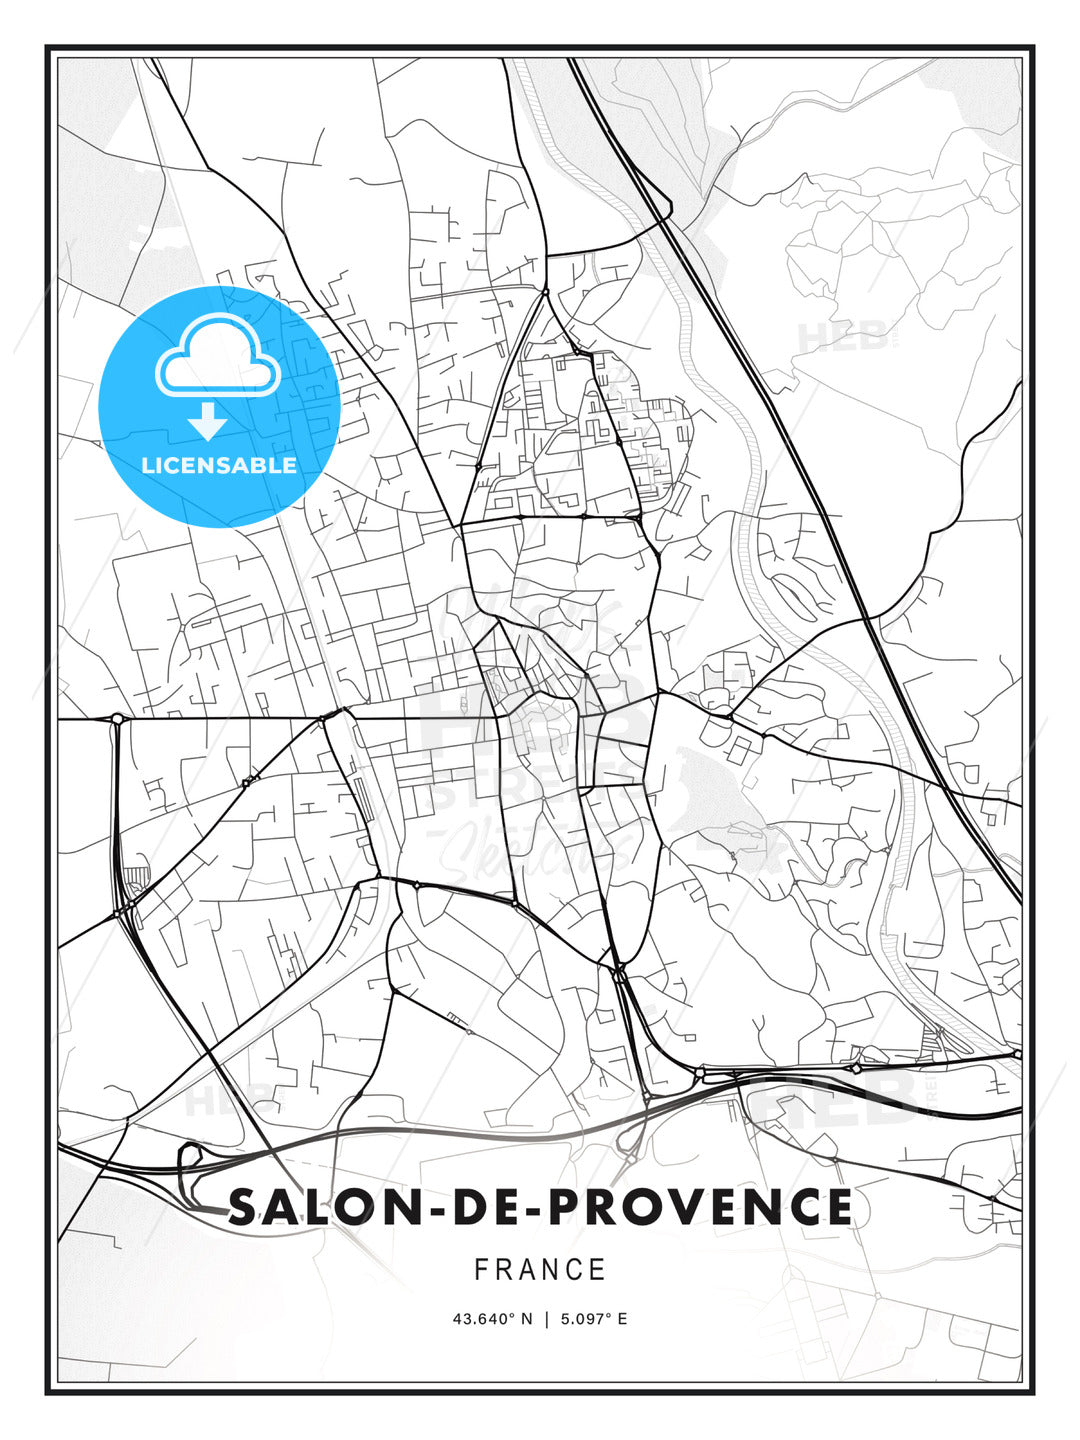 Salon-de-Provence, France, Modern Print Template in Various Formats - HEBSTREITS Sketches